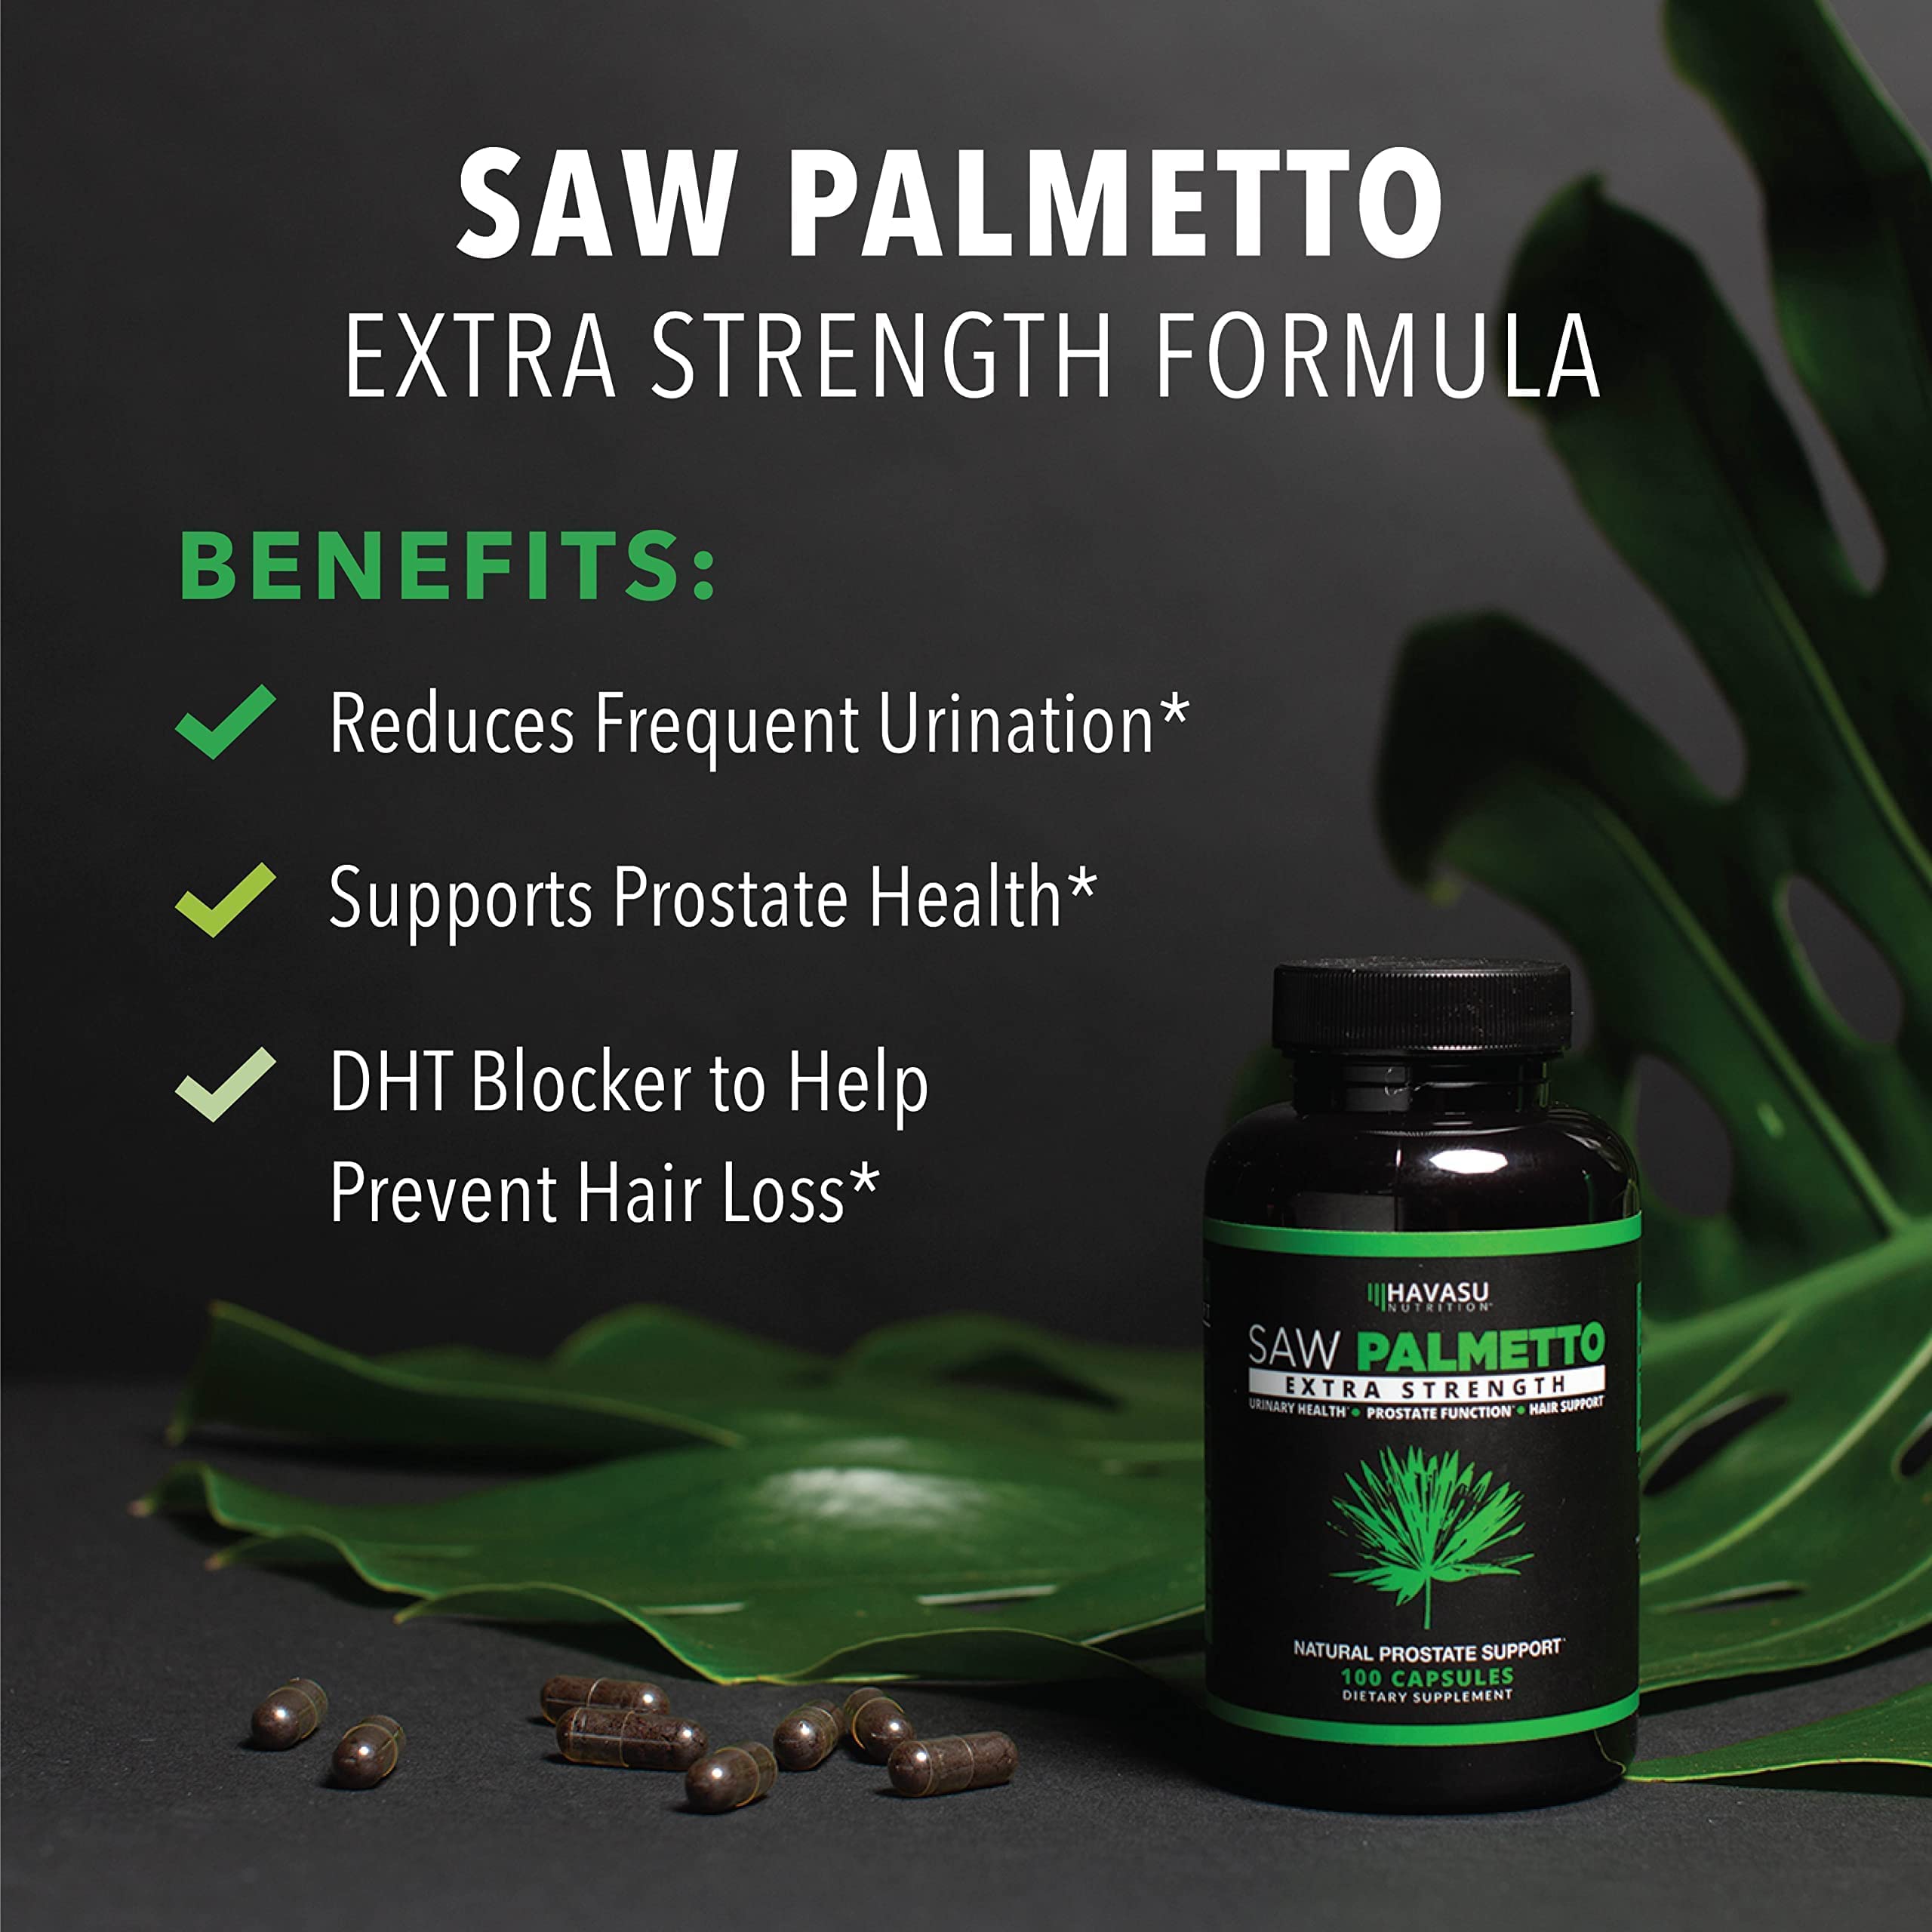 HAVASU NUTRITION L Arginine and Saw Palmetto Capsules as Ultimate Male Enhancing Supplement for Performance & Prostate Support by Aiding in Vascular Support from Nitric Oxide